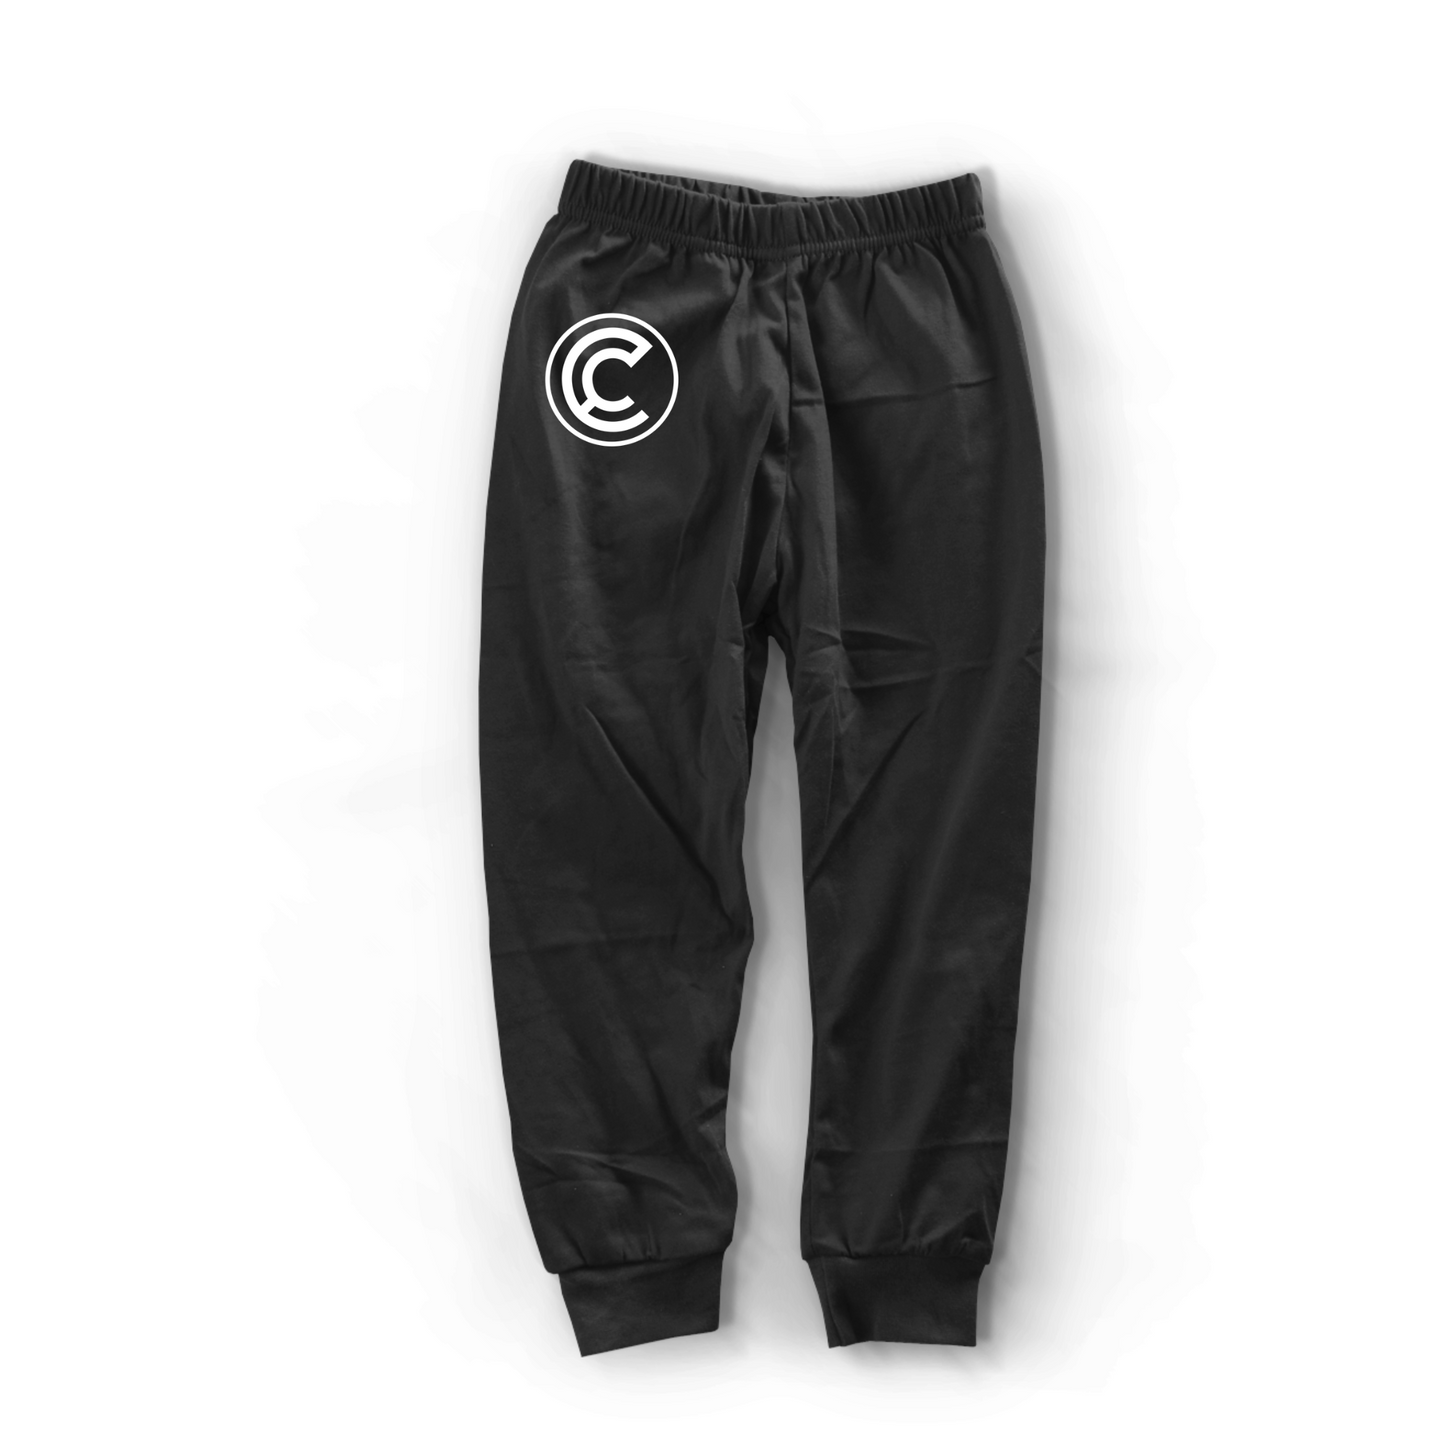 The Collab Joggers